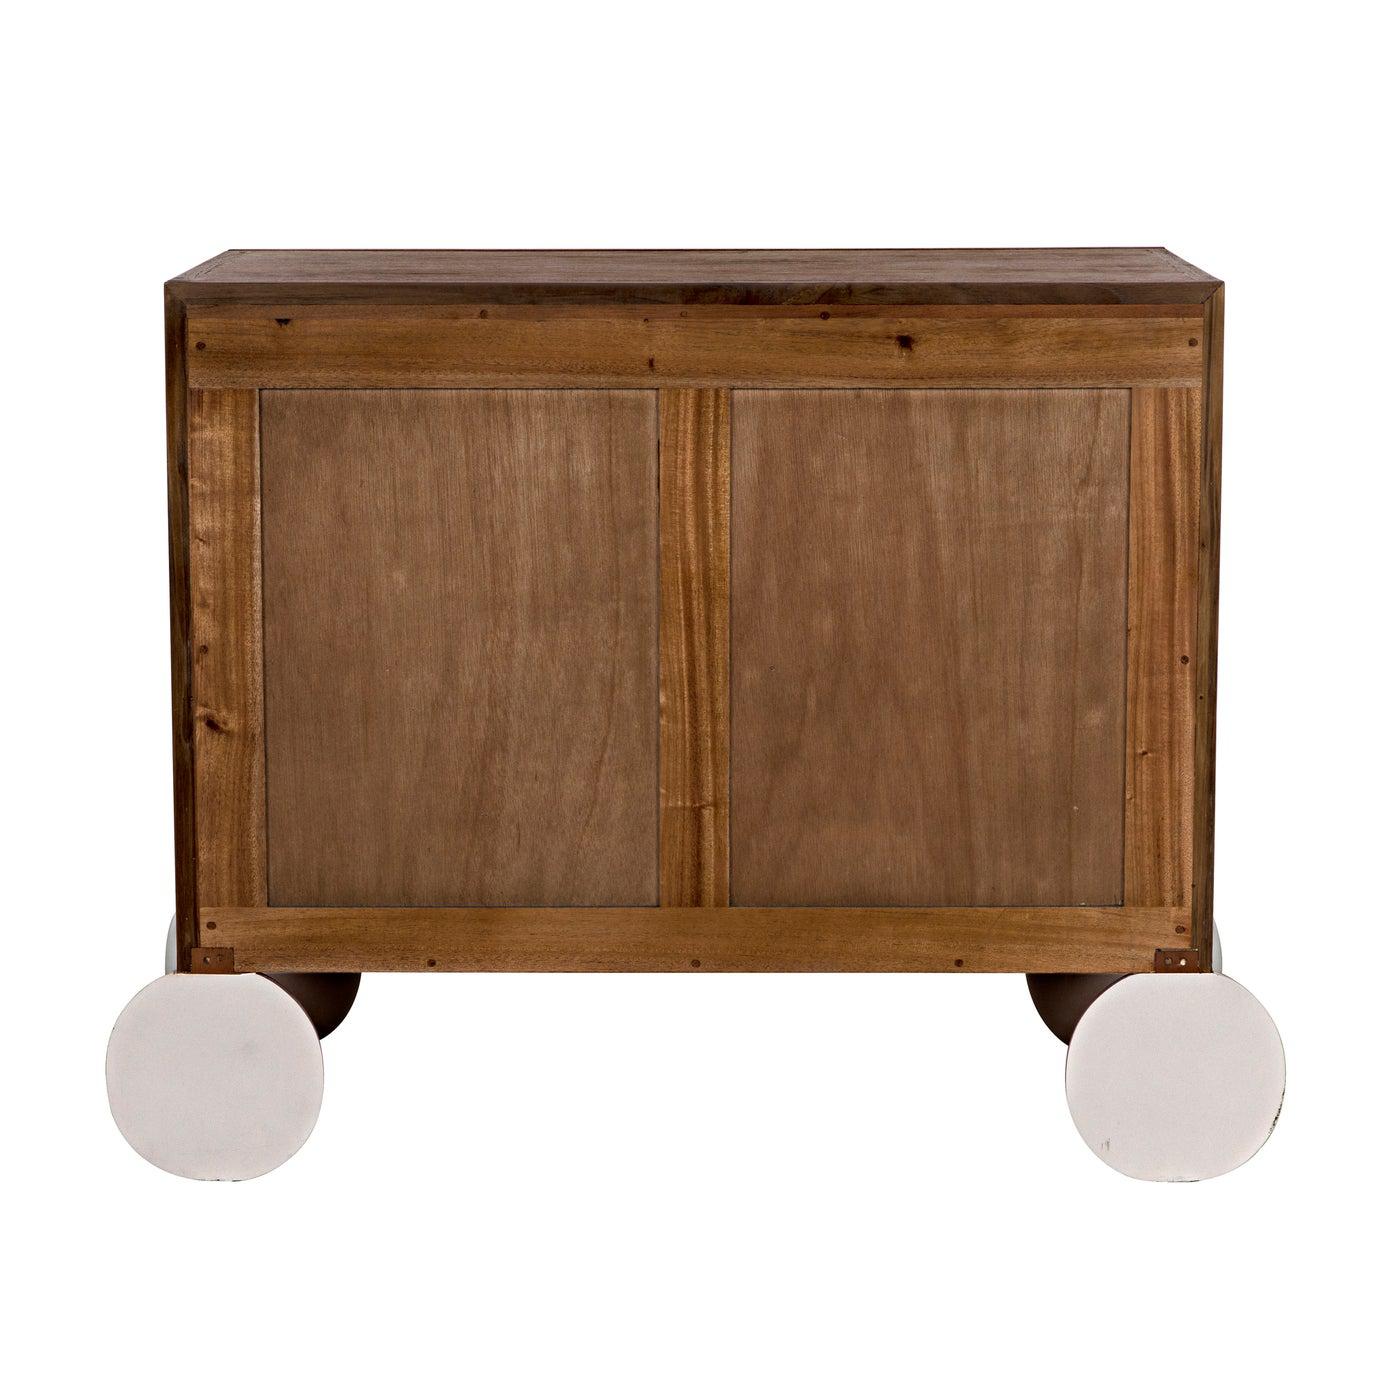 Marcel Side Table, Teak with White Details